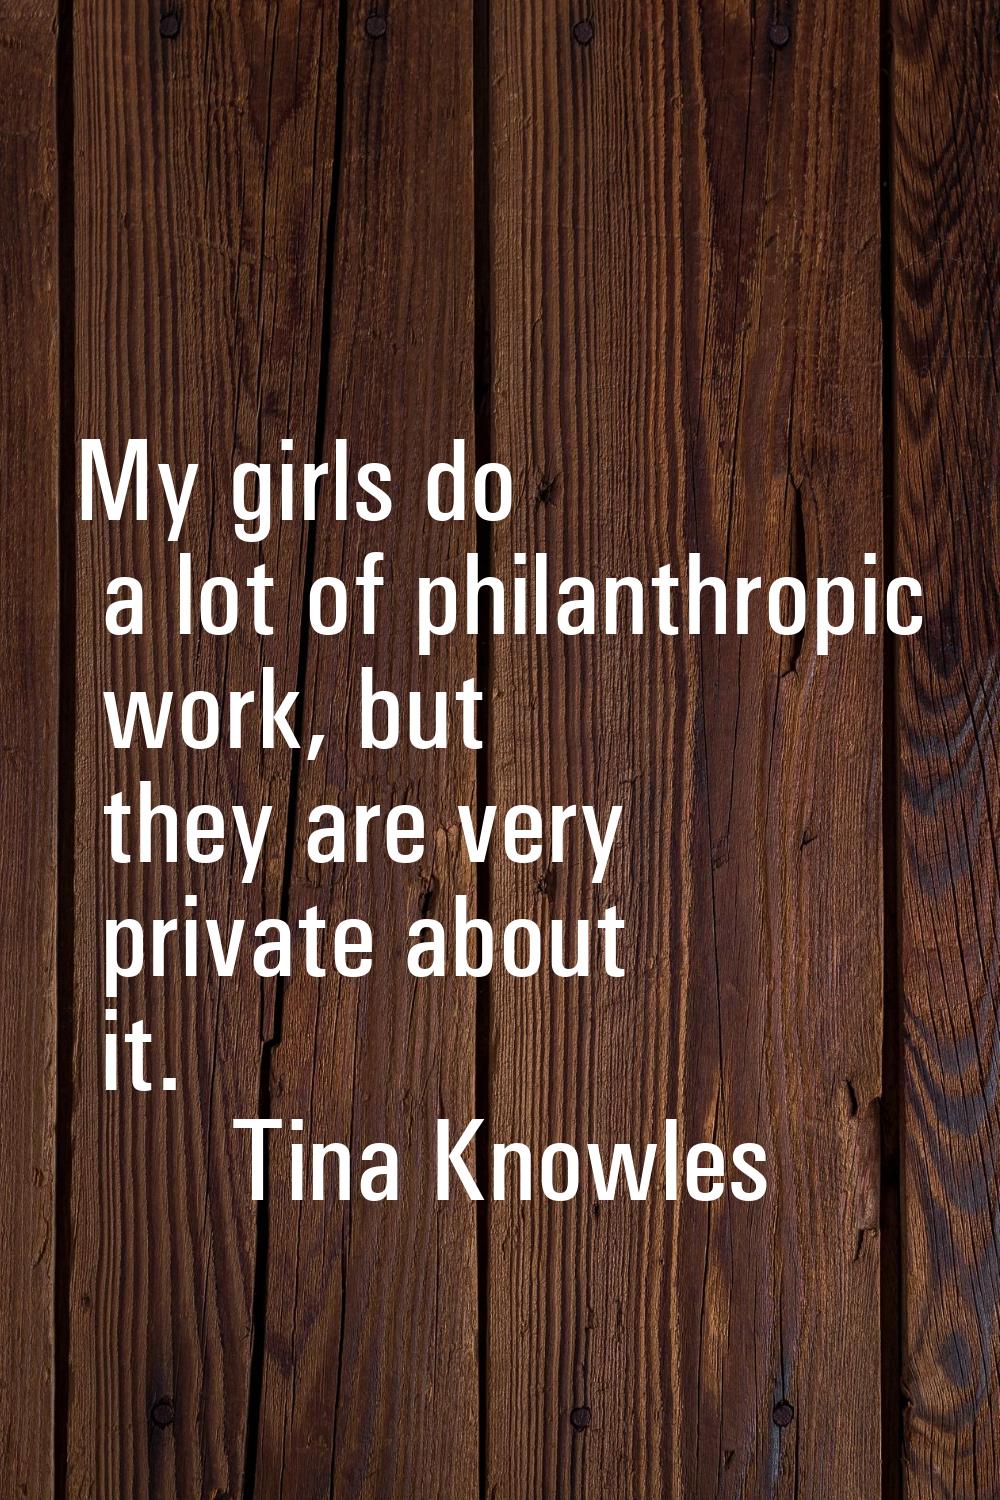 My girls do a lot of philanthropic work, but they are very private about it.